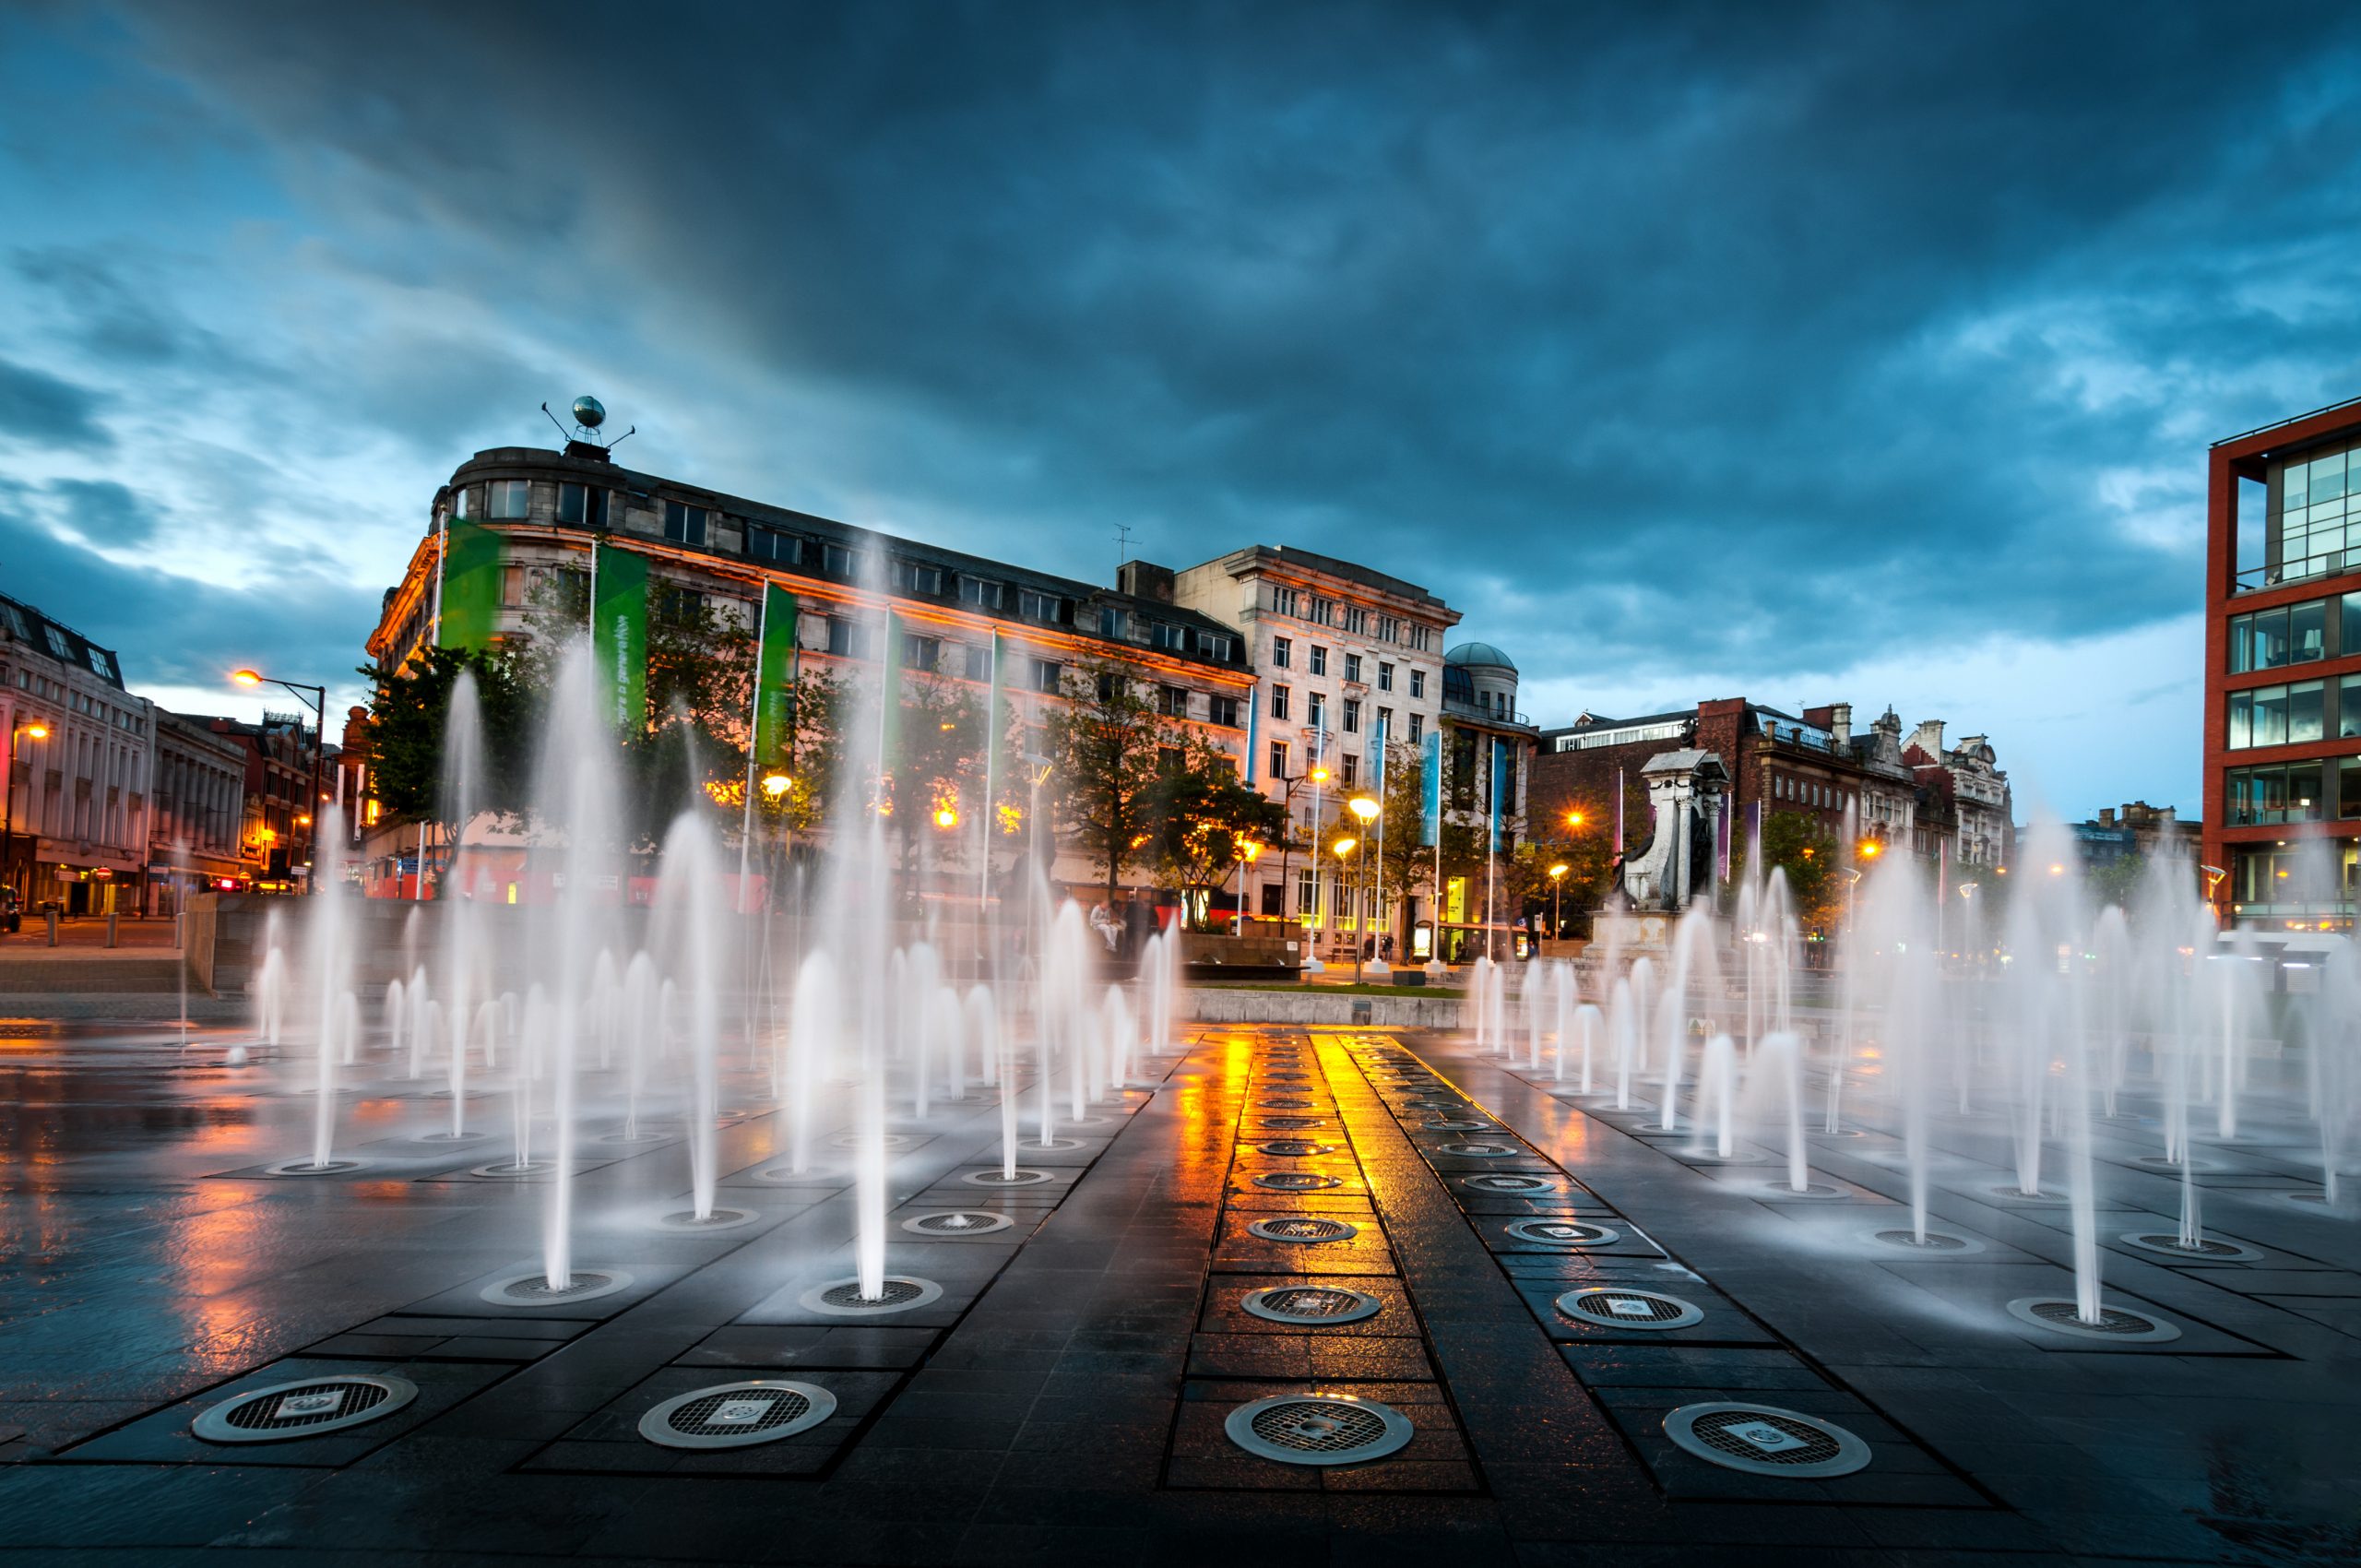 Manchester City Fountains